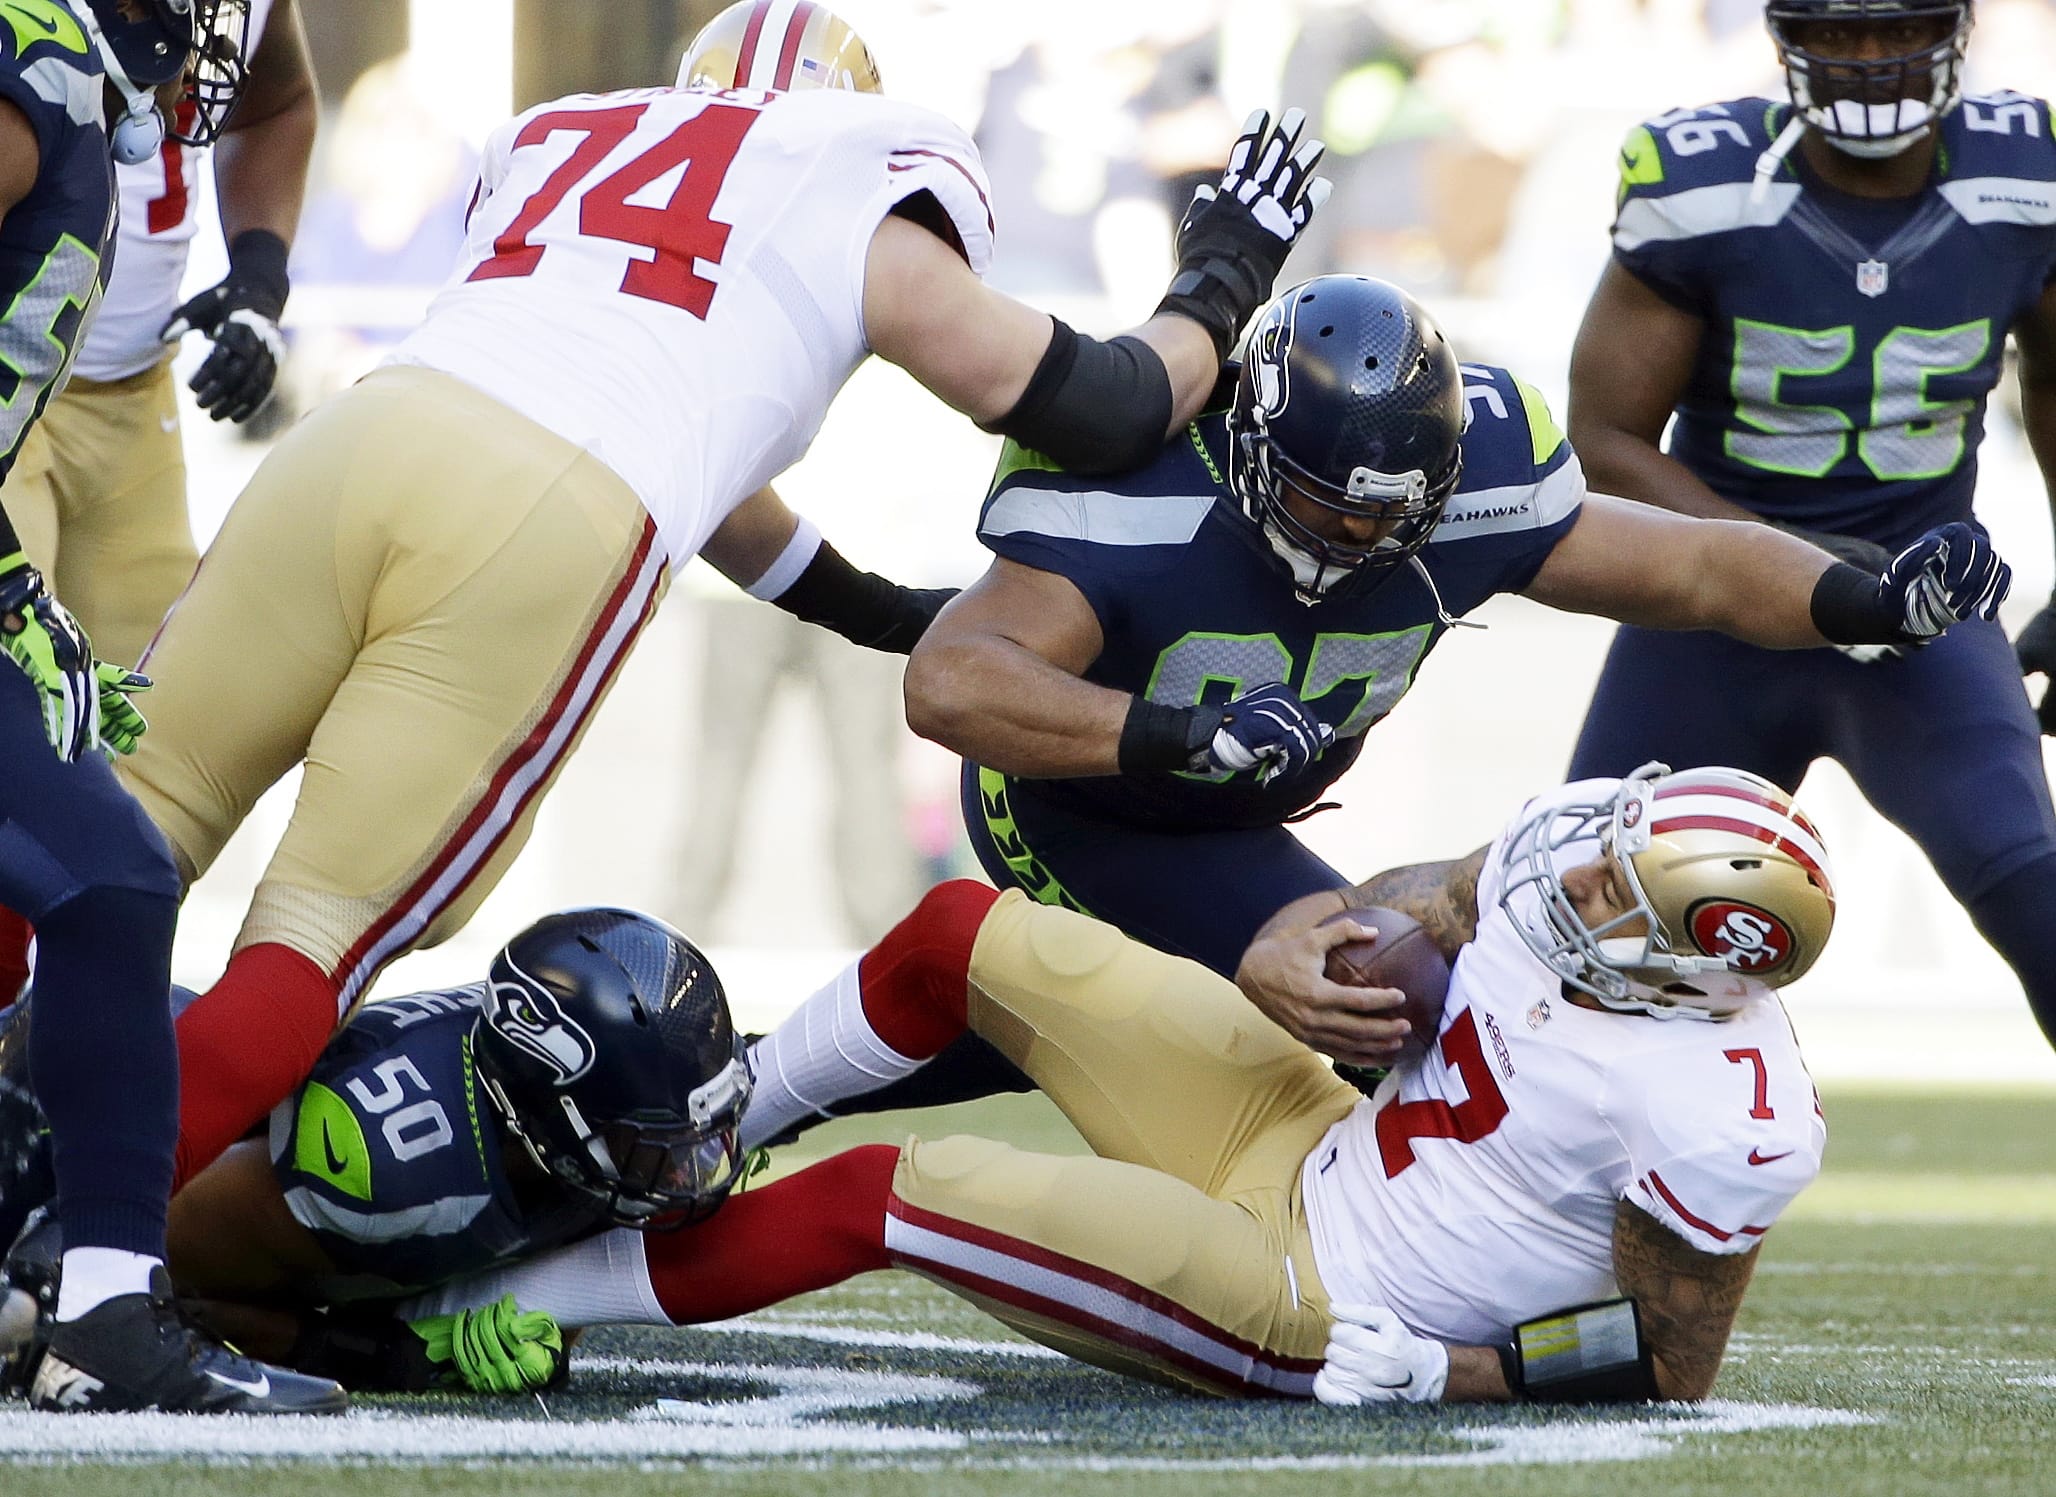 San Francisco 49ers quarterback Colin Kaepernick is sacked by Seattle Seahawks defensive tackle Jordan Hill (97) and outside linebacker K.J. Wright (50) in the first half against the Seattle Seahawks, Sunday, Dec.